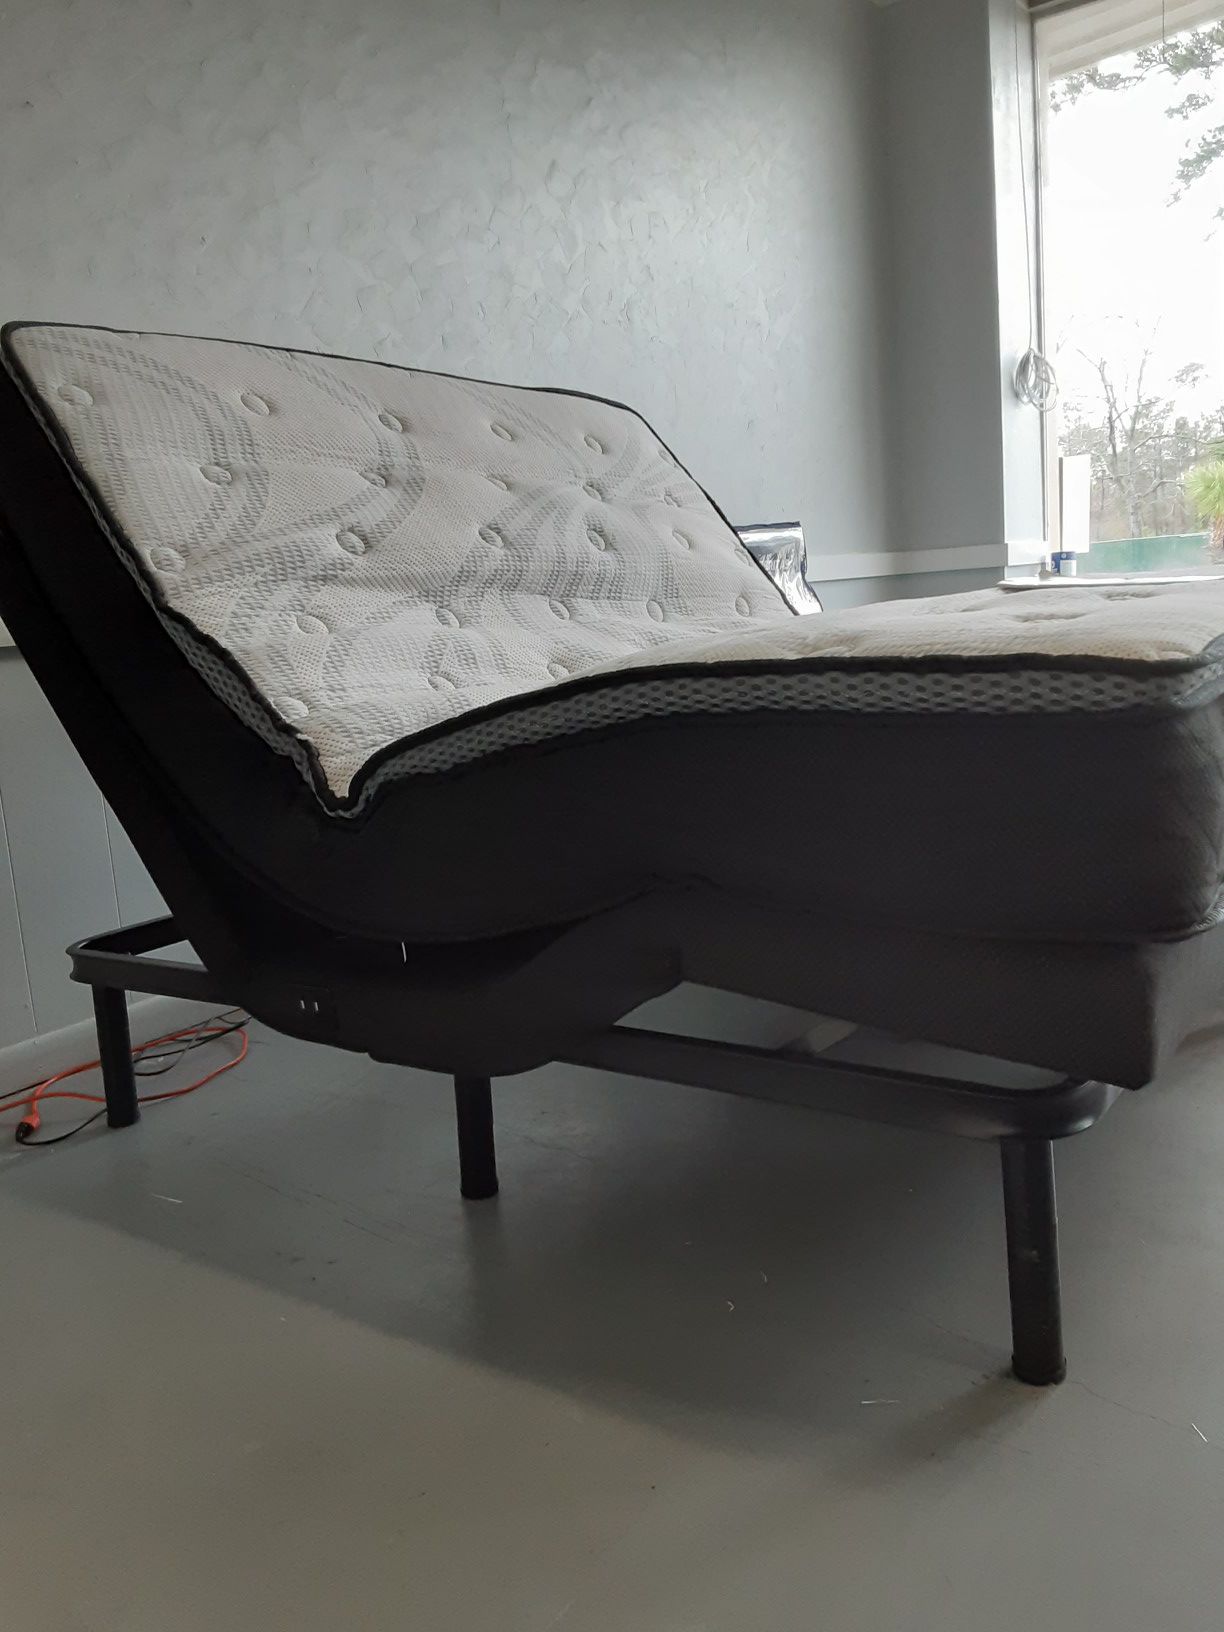 NEW Wireless vibrating adjustable bed. New mattress and adjustable frame combo